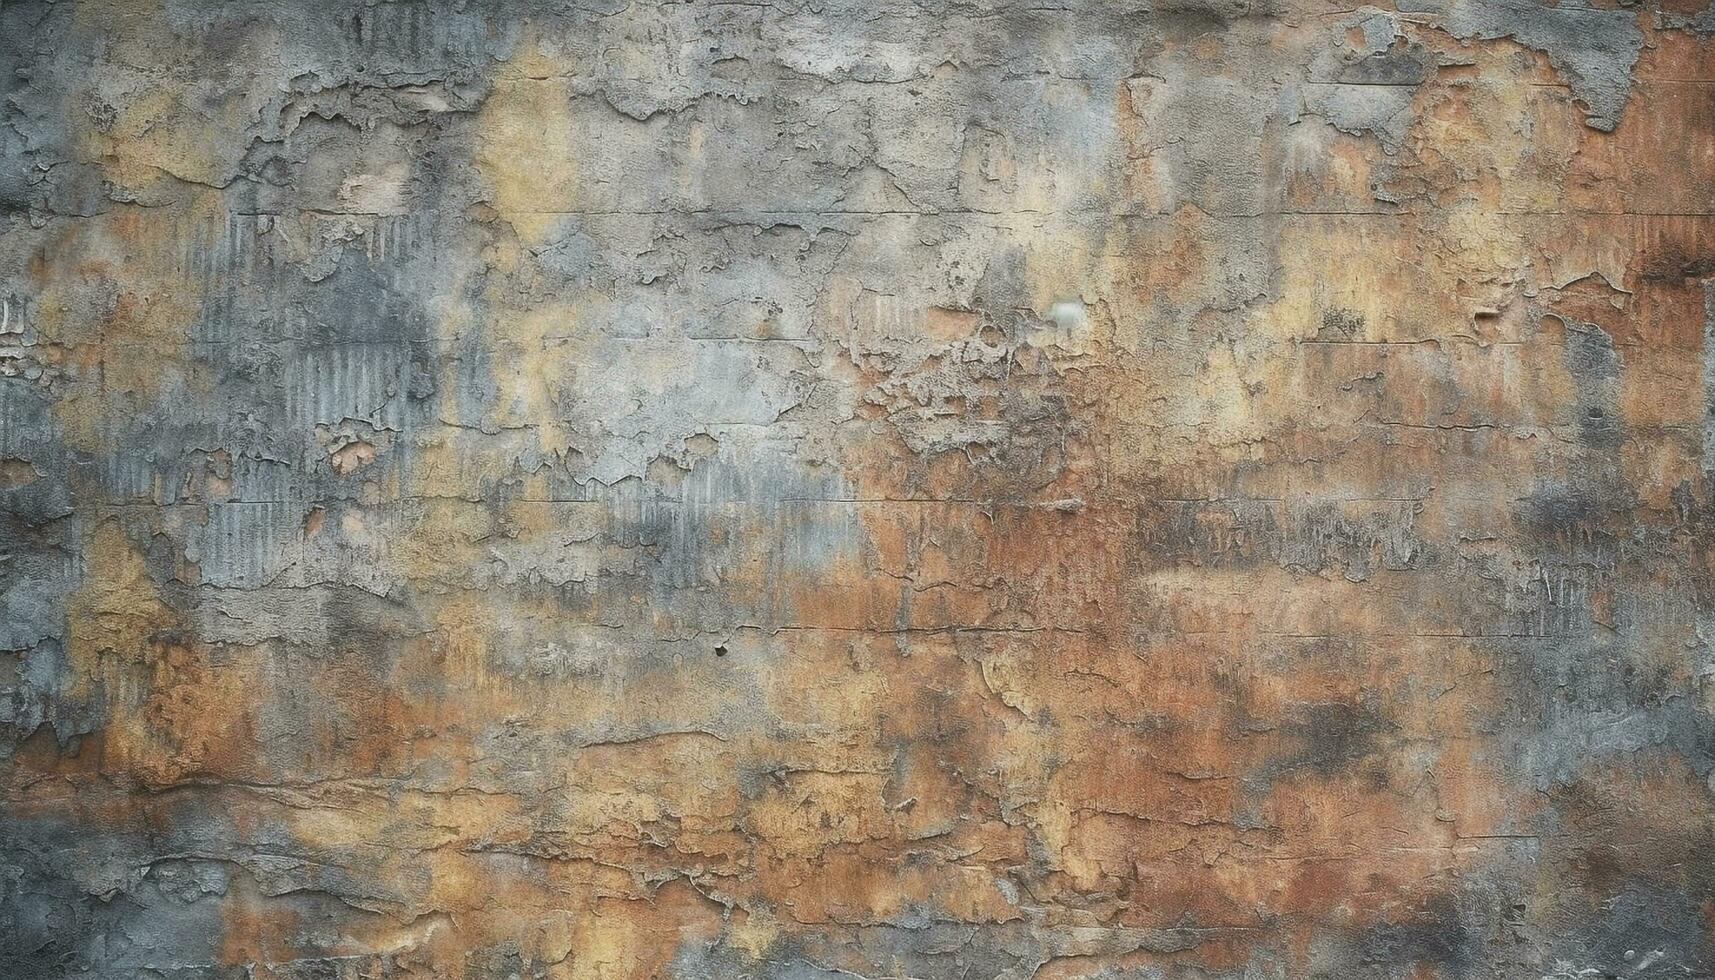 Rusty steel plate with grunge paint on old fashioned building feature generated by AI photo